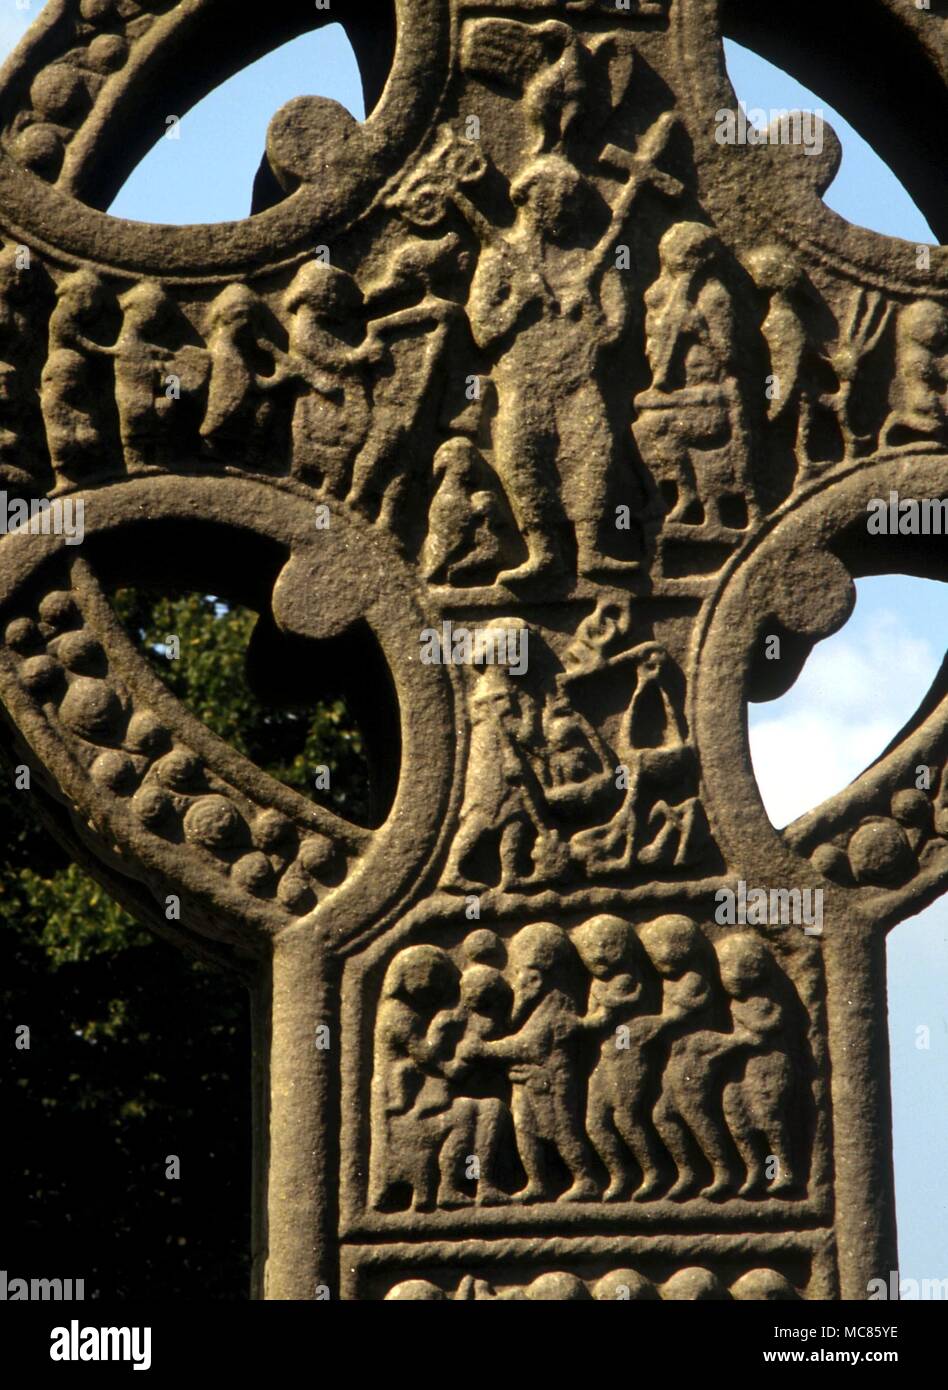 CHRISTIAN Last Judgement. Detail of central boss of the 10th century 'South Cross' at Monasterboice, with The Last Judgement theme. Christ holds the cross and the flowering rod. Below is Michael with the scales. The cross is 18 feet high, sometimes called Muiredach's Cross Stock Photo